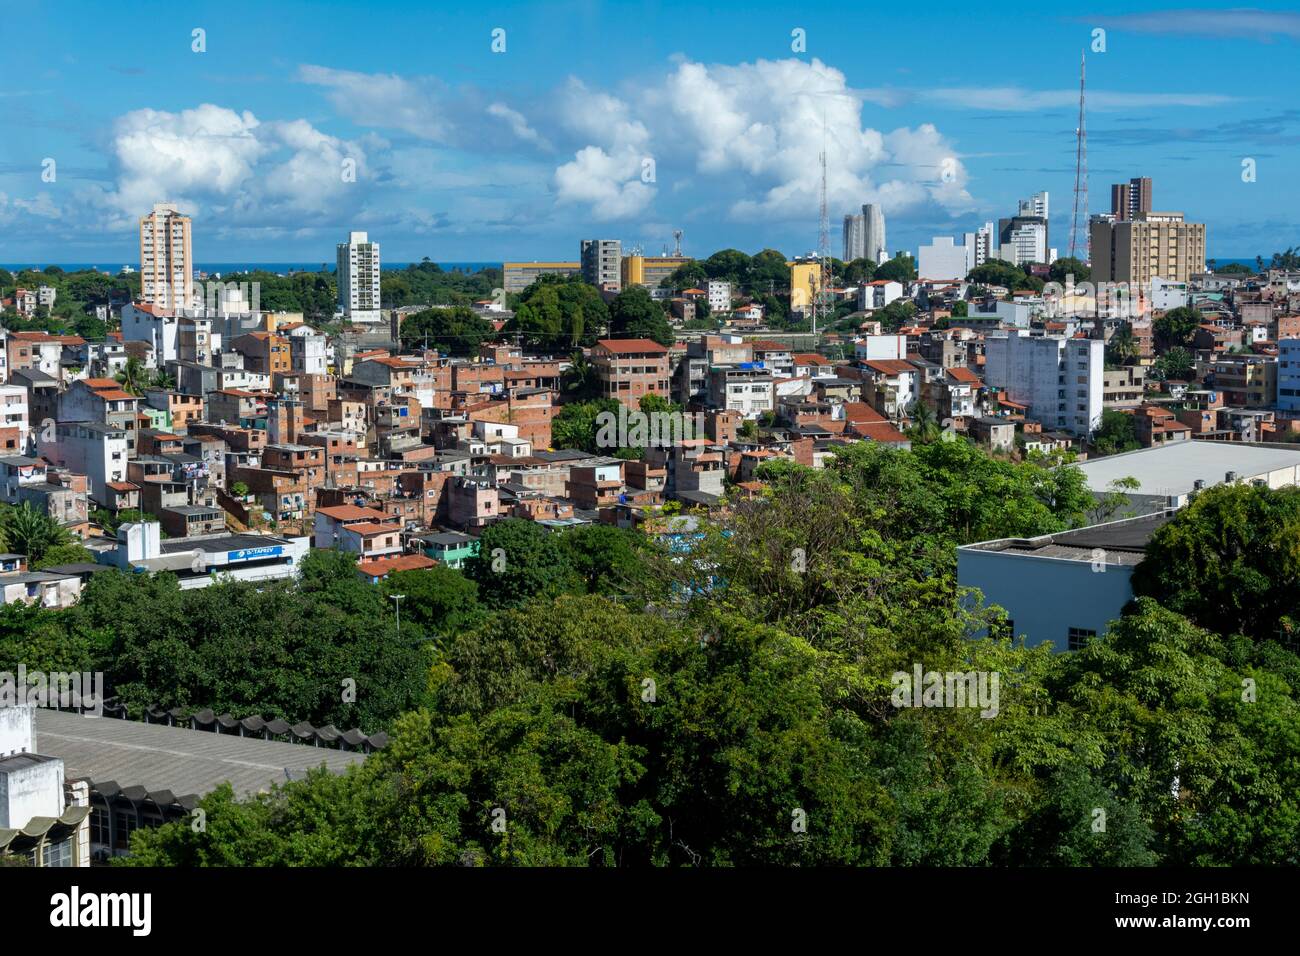 Salvador, Bahia, Brazil - April 06, 2014: View of the buildings and popular houses built in the mountains. City of Salvador, Bahia, Brazil. Stock Photo